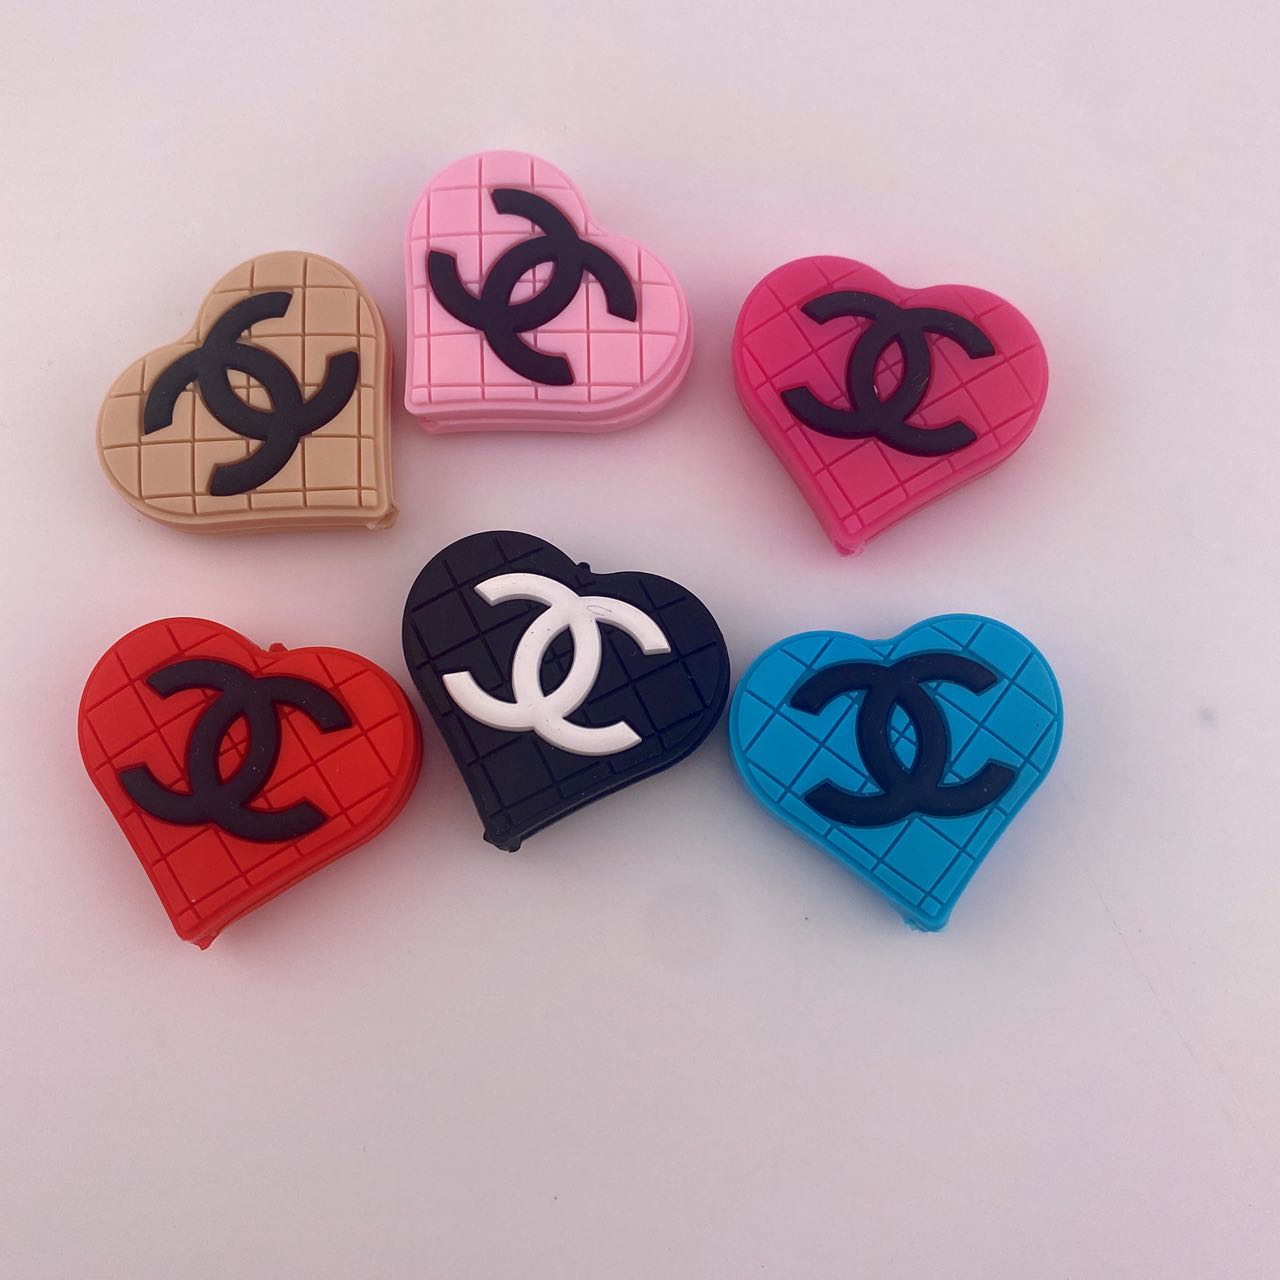 L V SILICONE BEADS WILL BE AVAILABLE ON THE WEBSITE HERE SOON. #classy, Beads